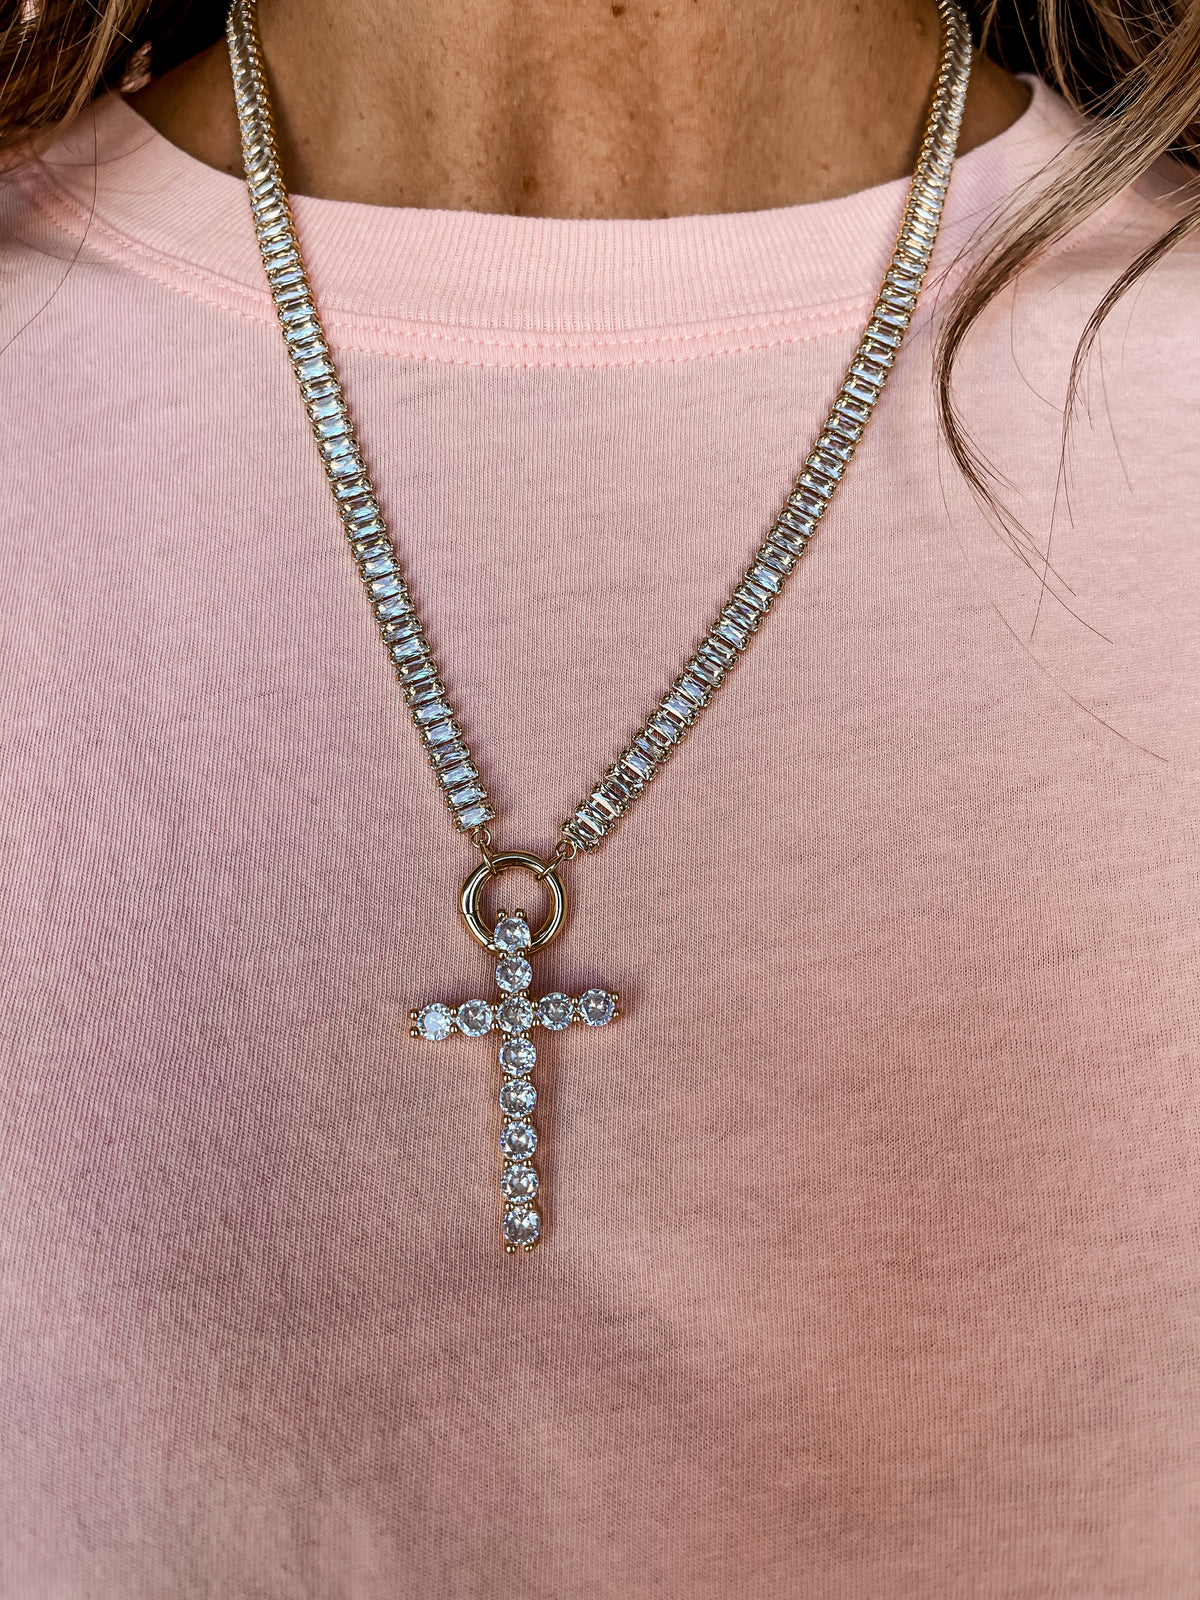 Buy Lords Prayer Crystal Cross Necklace, Crystal Cross Necklace, Cross  Prayer Projection Necklace, Rosemary Cross, Mother's Day Gift for Mom  Online in India - Etsy